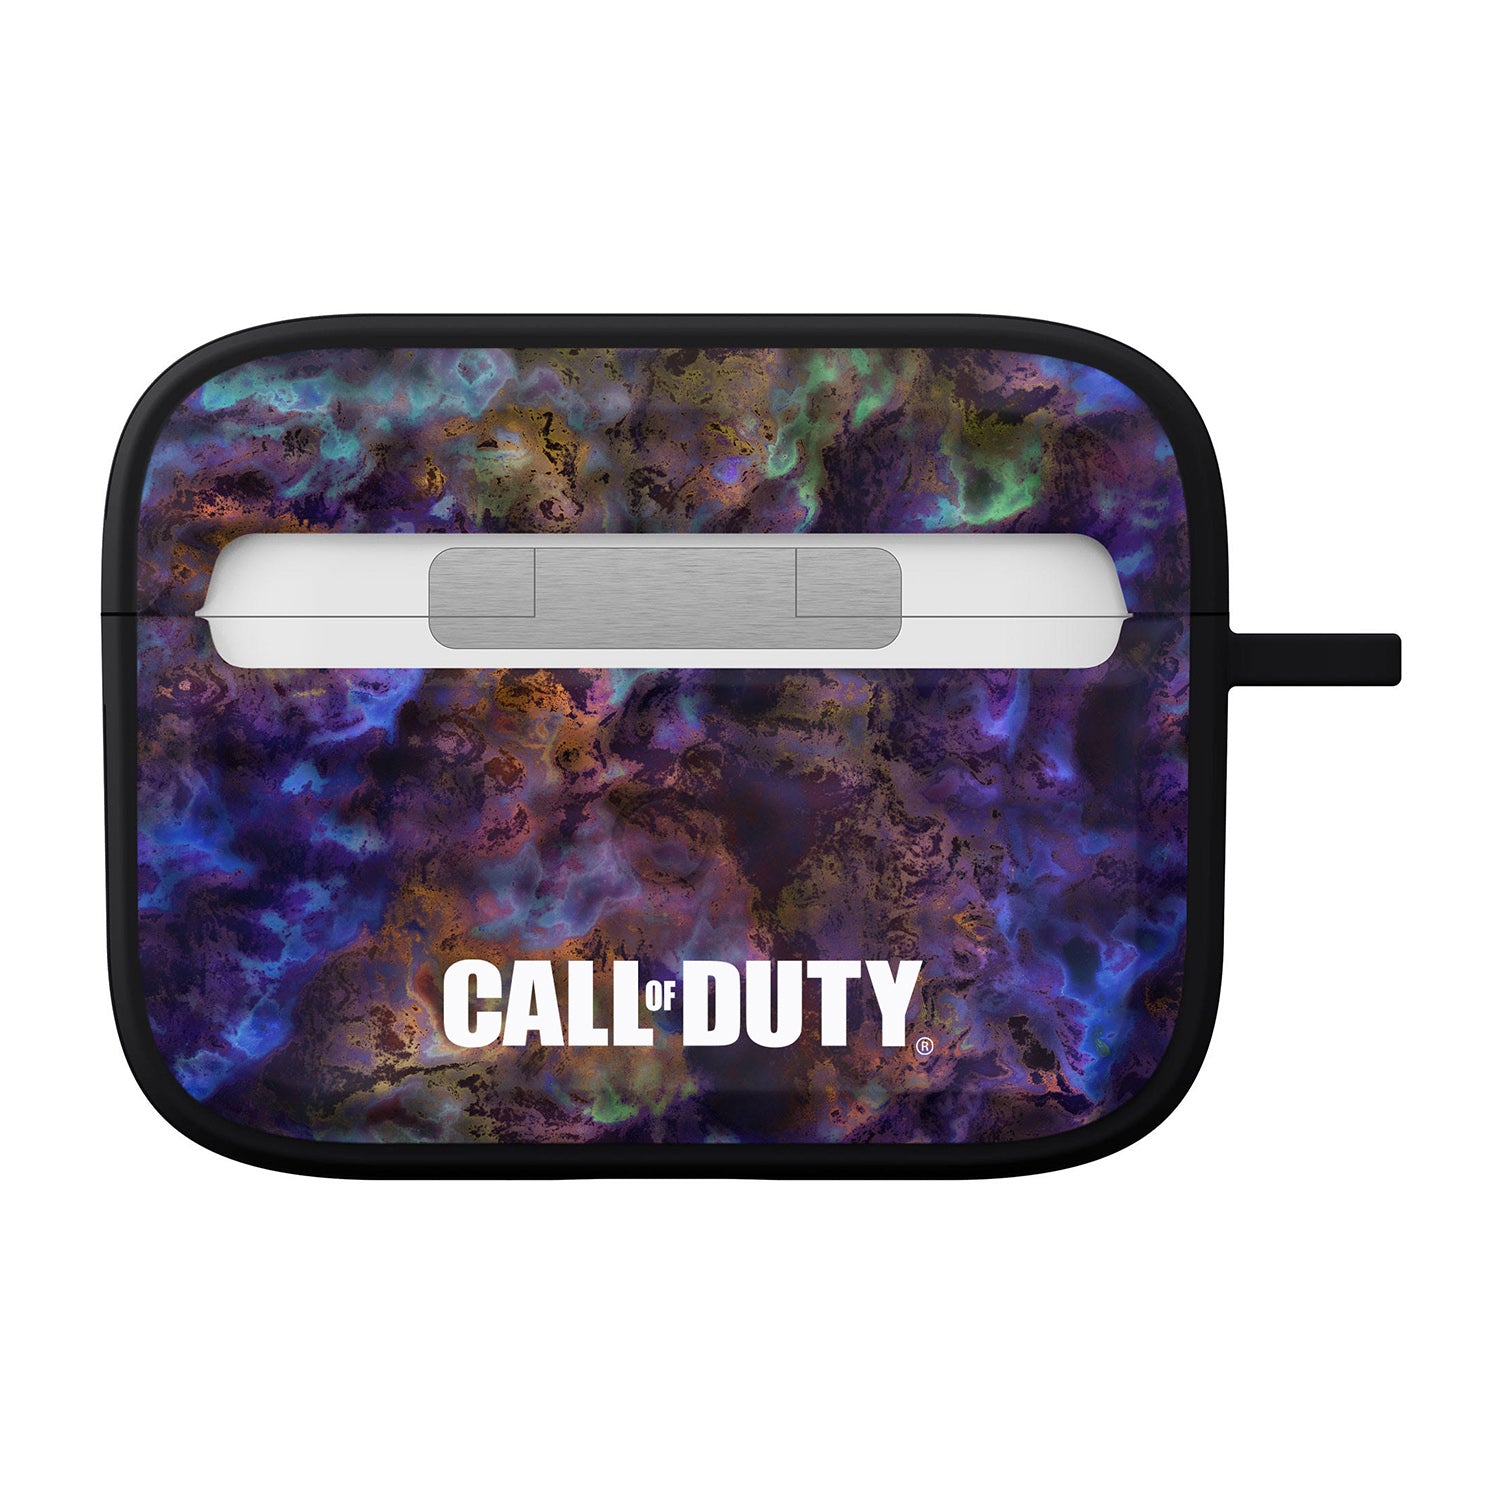 Call of Duty Orion Camo Apple AirPods Pro Case - Back View with Call of Duty Logo